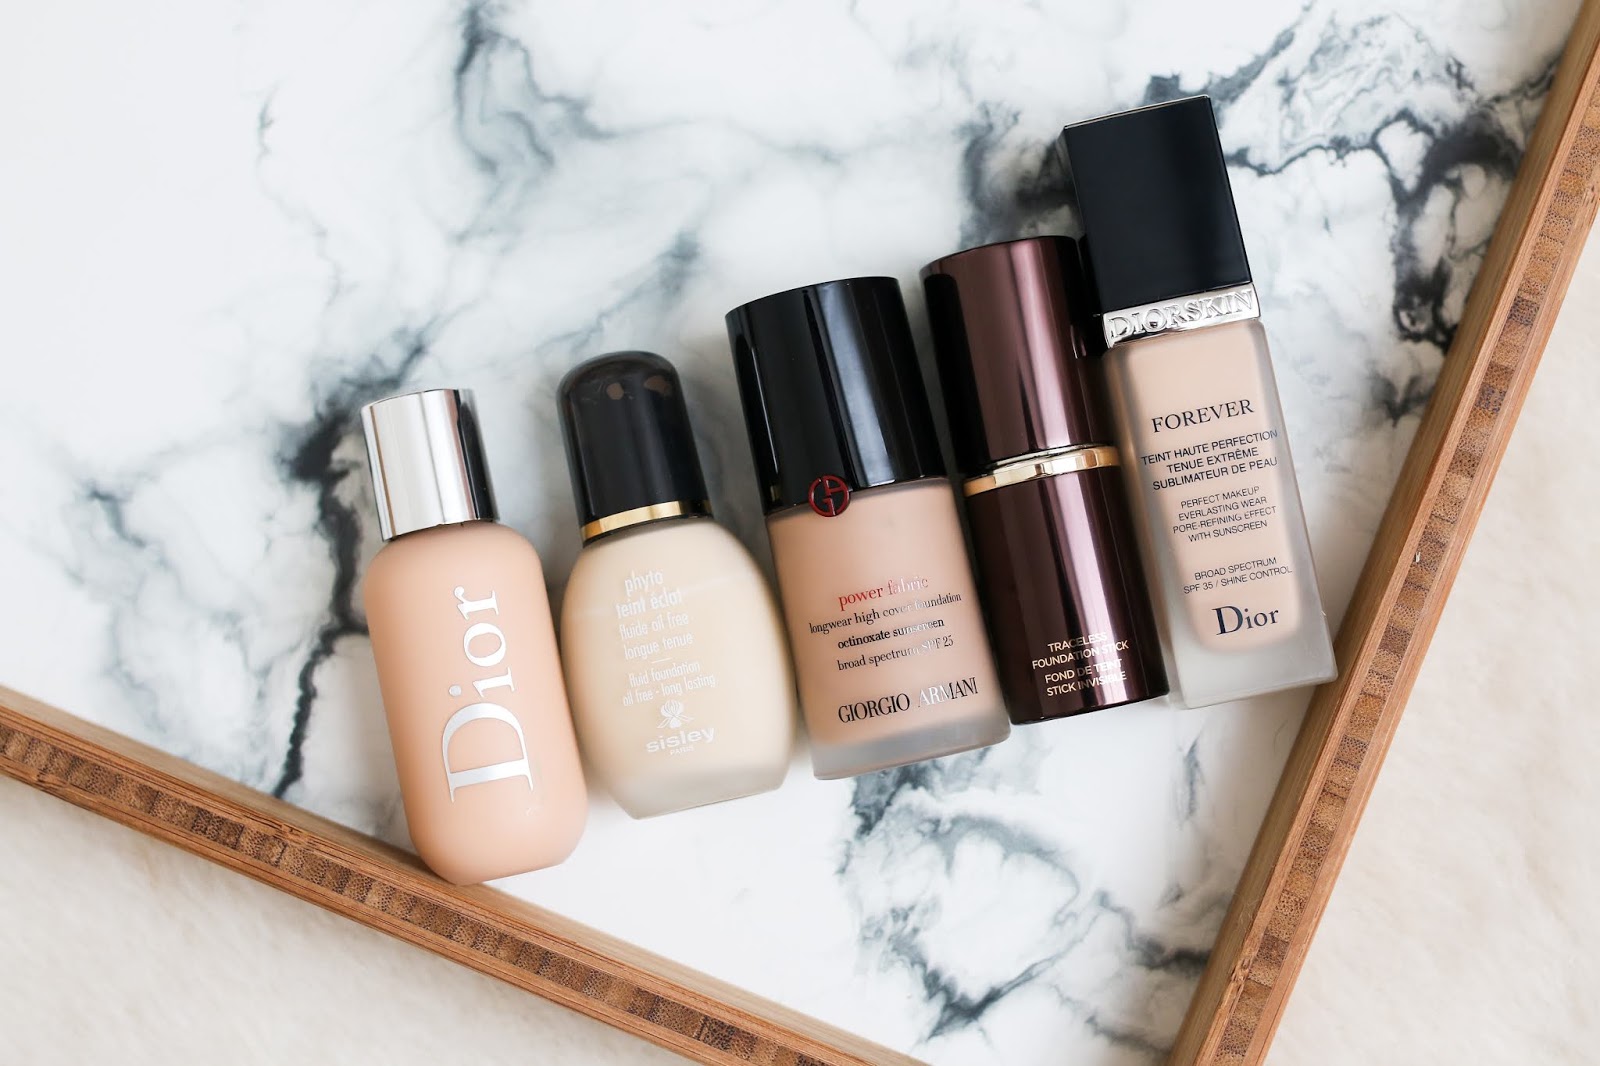 My Favorite Foundations At the Moment | alittlebitetc